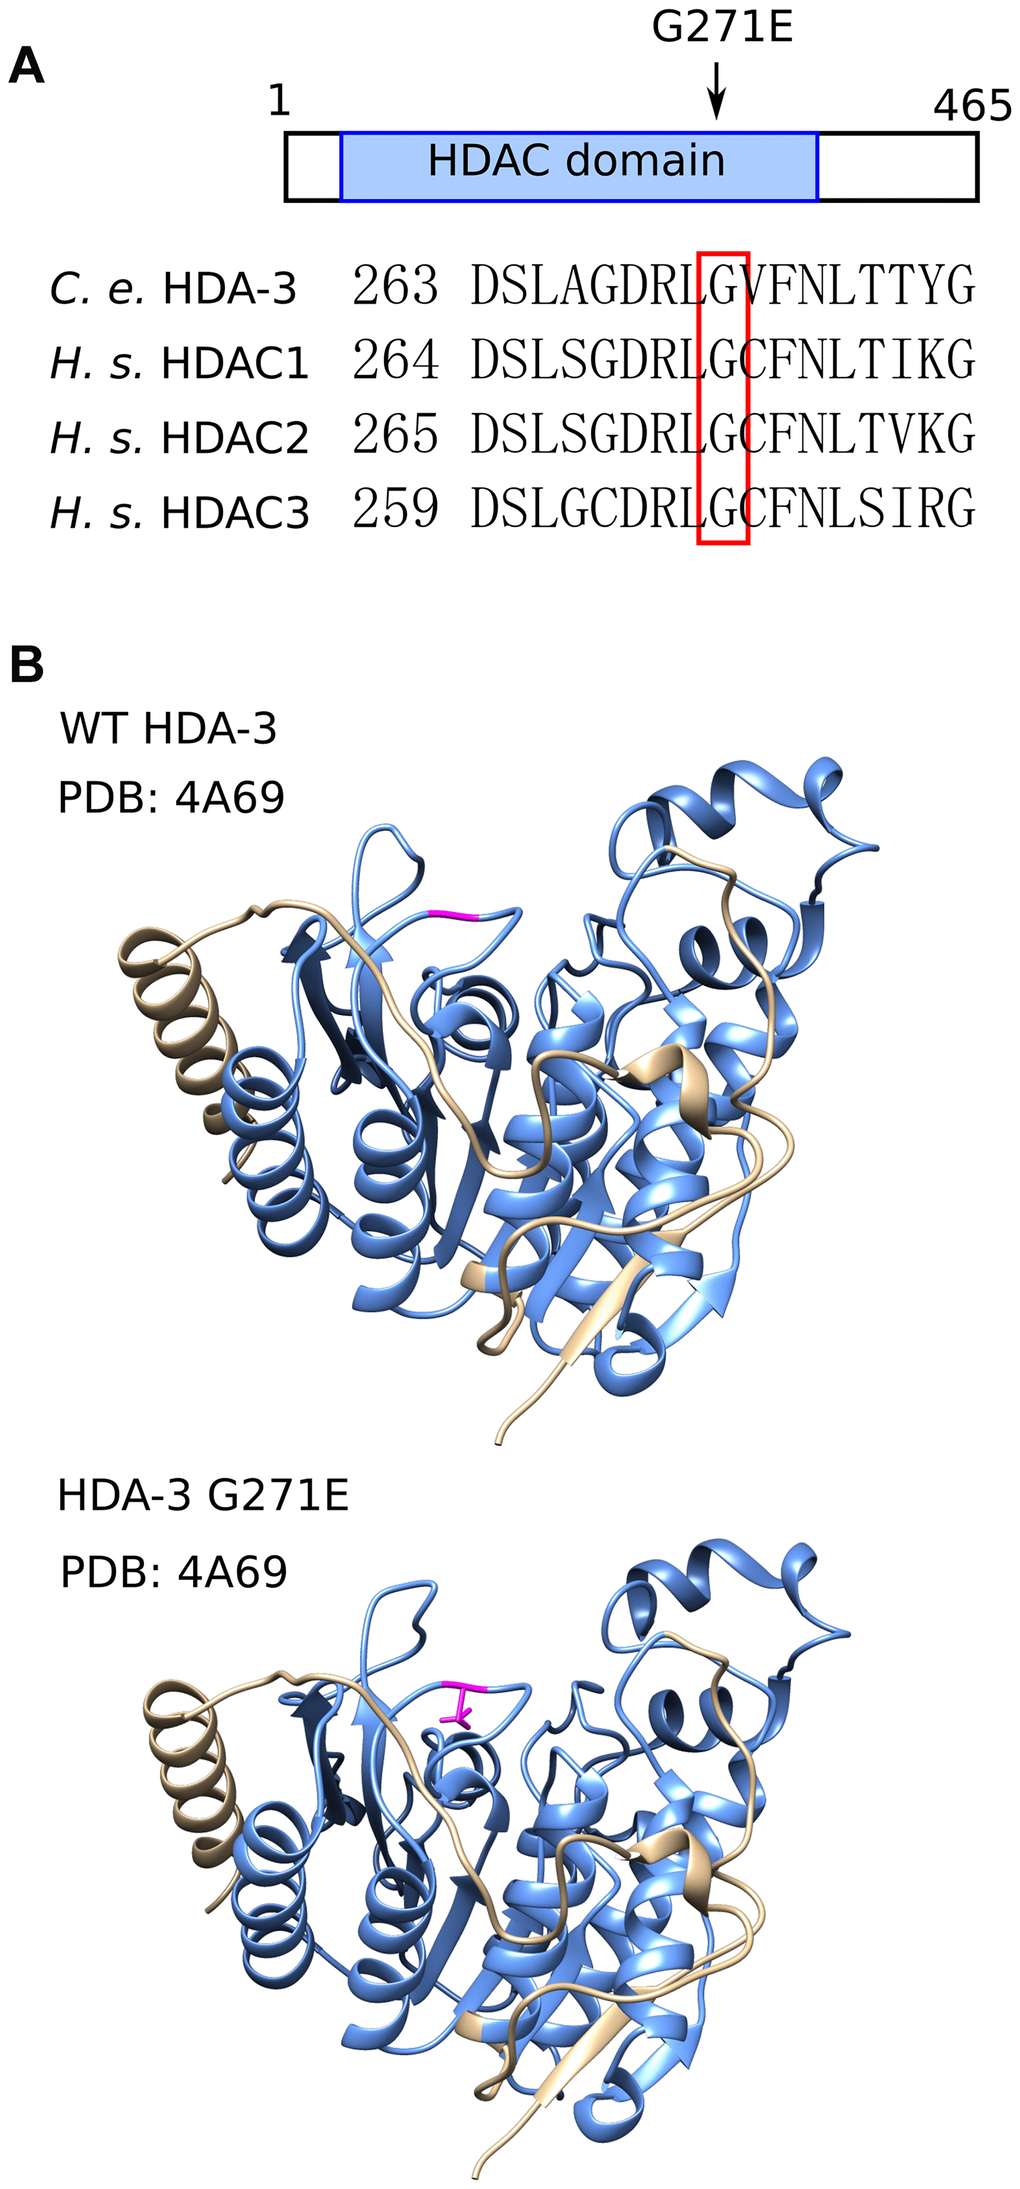 HDA-3 G271E missense mutation occurs at evolutionarily conserved residue. (A) (Top) Depiction of hda-3(ix241) mutation site in HDA-3 protein. (Bottom) Alignment of amino acid sequences centered around G271E mutation site in C. elegans HDA-3, H. sapiens HDAC1, HDAC2 and HDAC3. (B) (Top) Structural modeling of C. elegans WT HDA-3 based on PDB: 4A69 from H. Sapiens HDAC3. (Bottom) Structural modeling of C. elegans HDA-3 G271E based on PDB: 4A69 from H. Sapiens HDAC3. Mutated glutamic acid residue is shown in magenta. HDAC domain is indicated in blue.